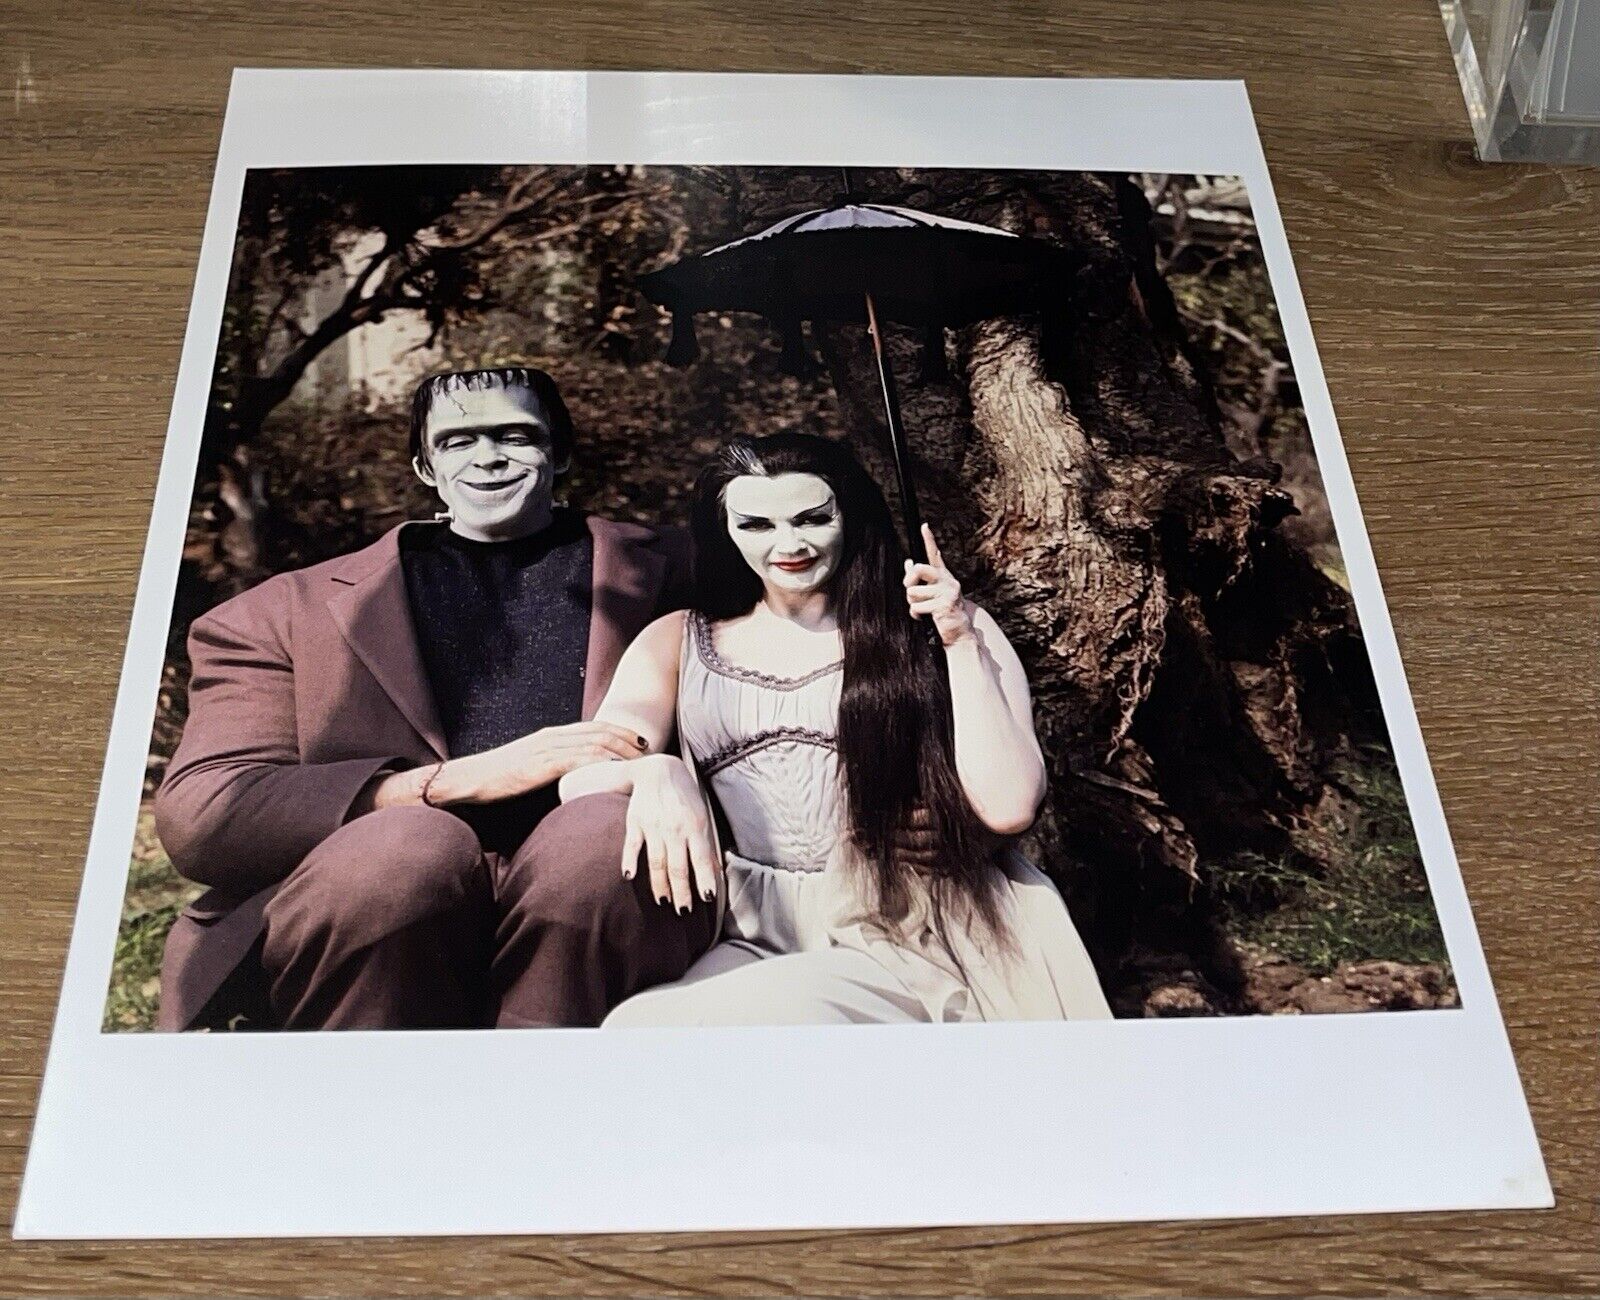 Original Vintage Type 1 Photo 🎥 The MUNSTERS Herman and Lily 1964 Sitcom